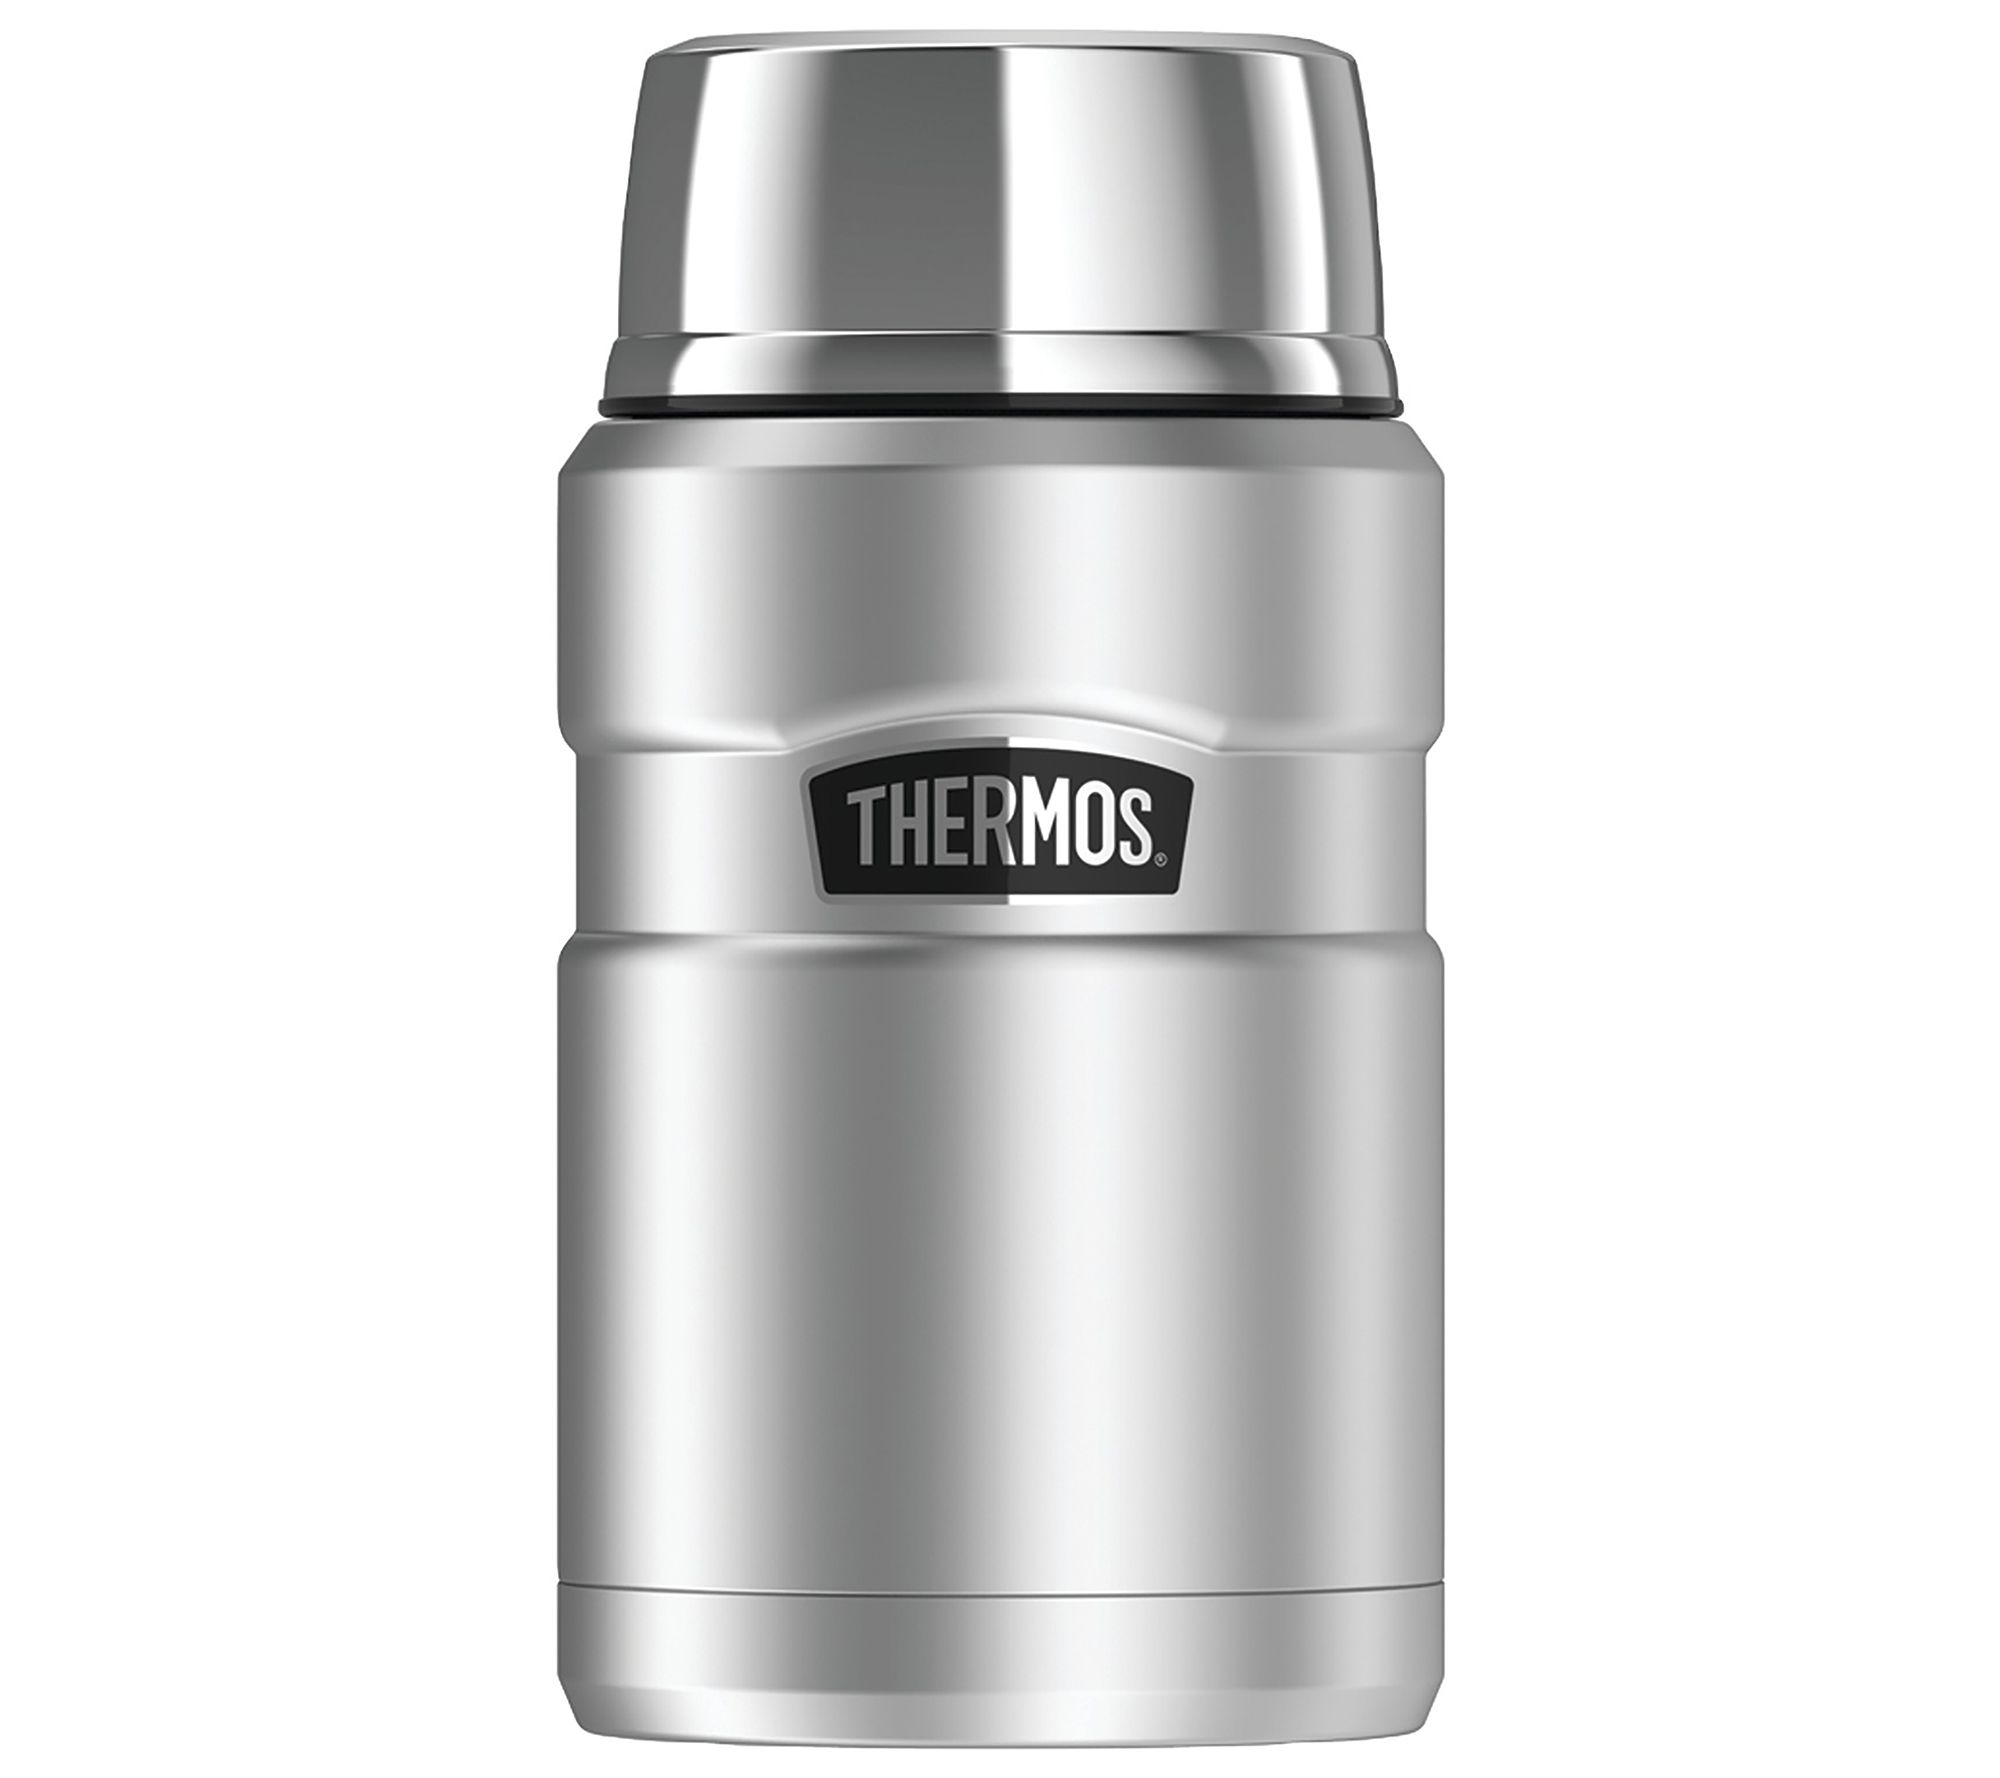  Thermos Vacuum Insulated Food Jar, 10 oz : Home & Kitchen